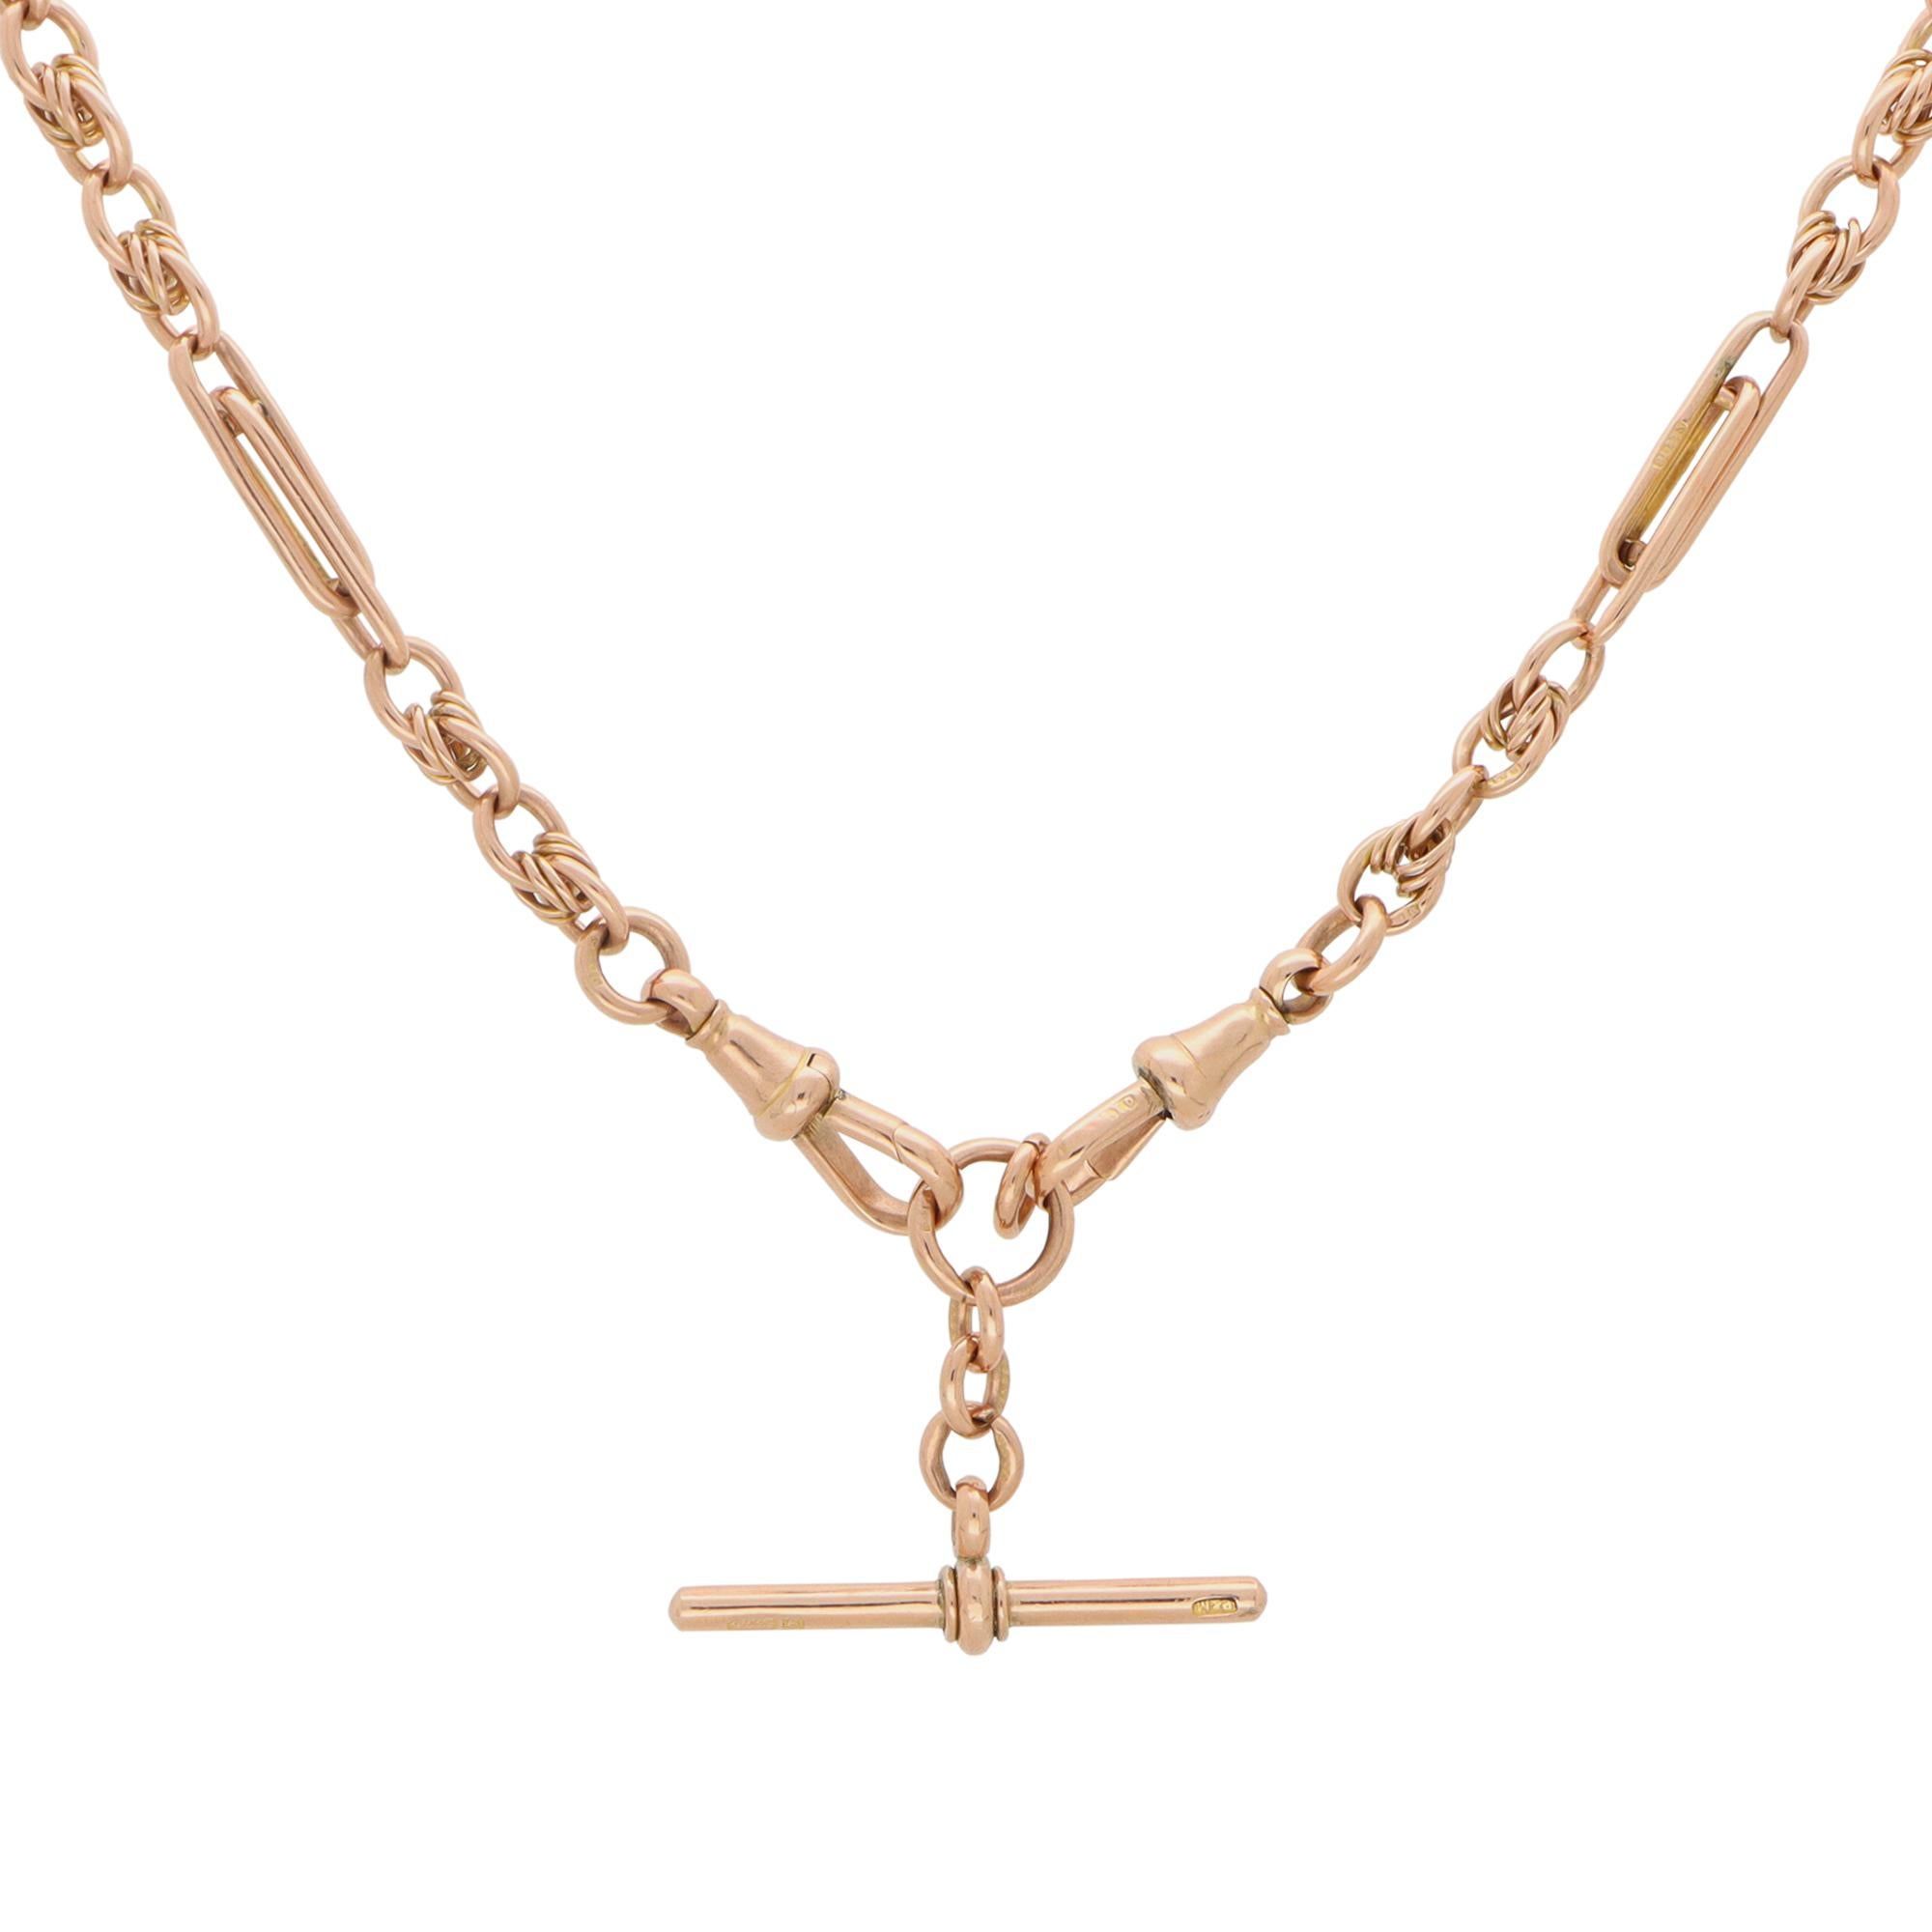 Vintage Albert Chain Necklace in 9k Rose Gold In Excellent Condition For Sale In London, GB